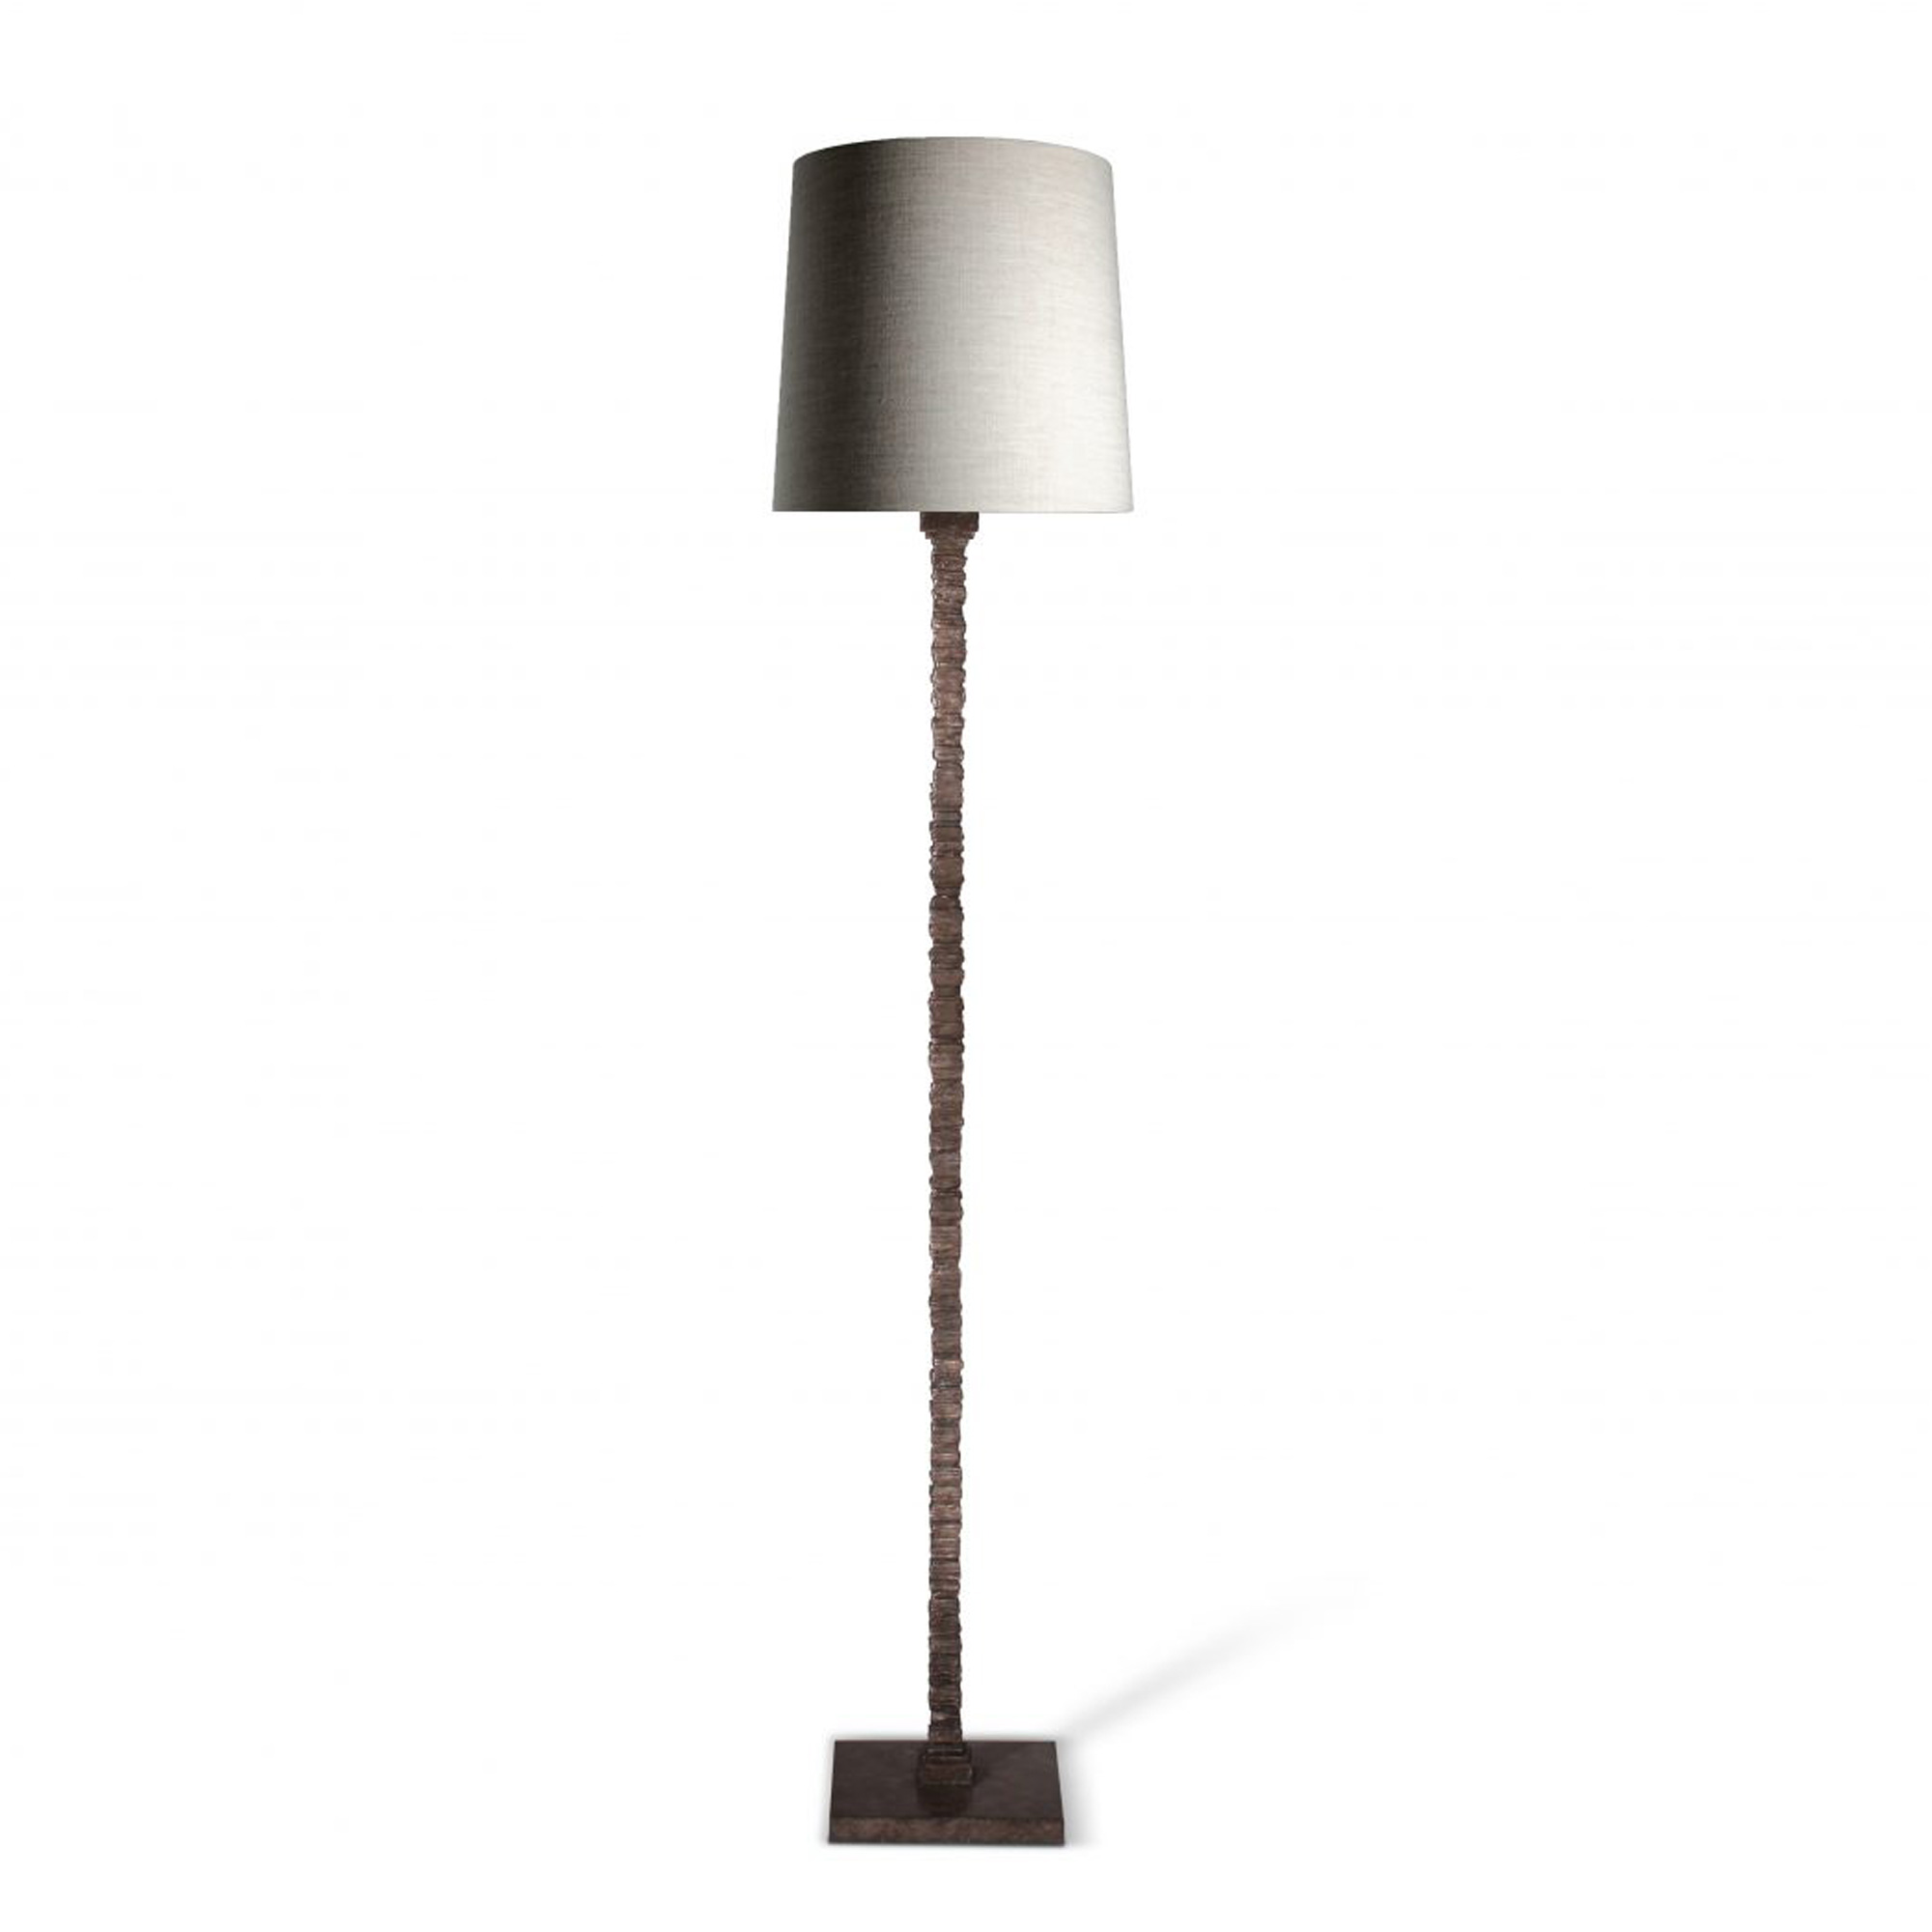 STATIC FLOOR LAMP by Porta Romana | South Hill Home